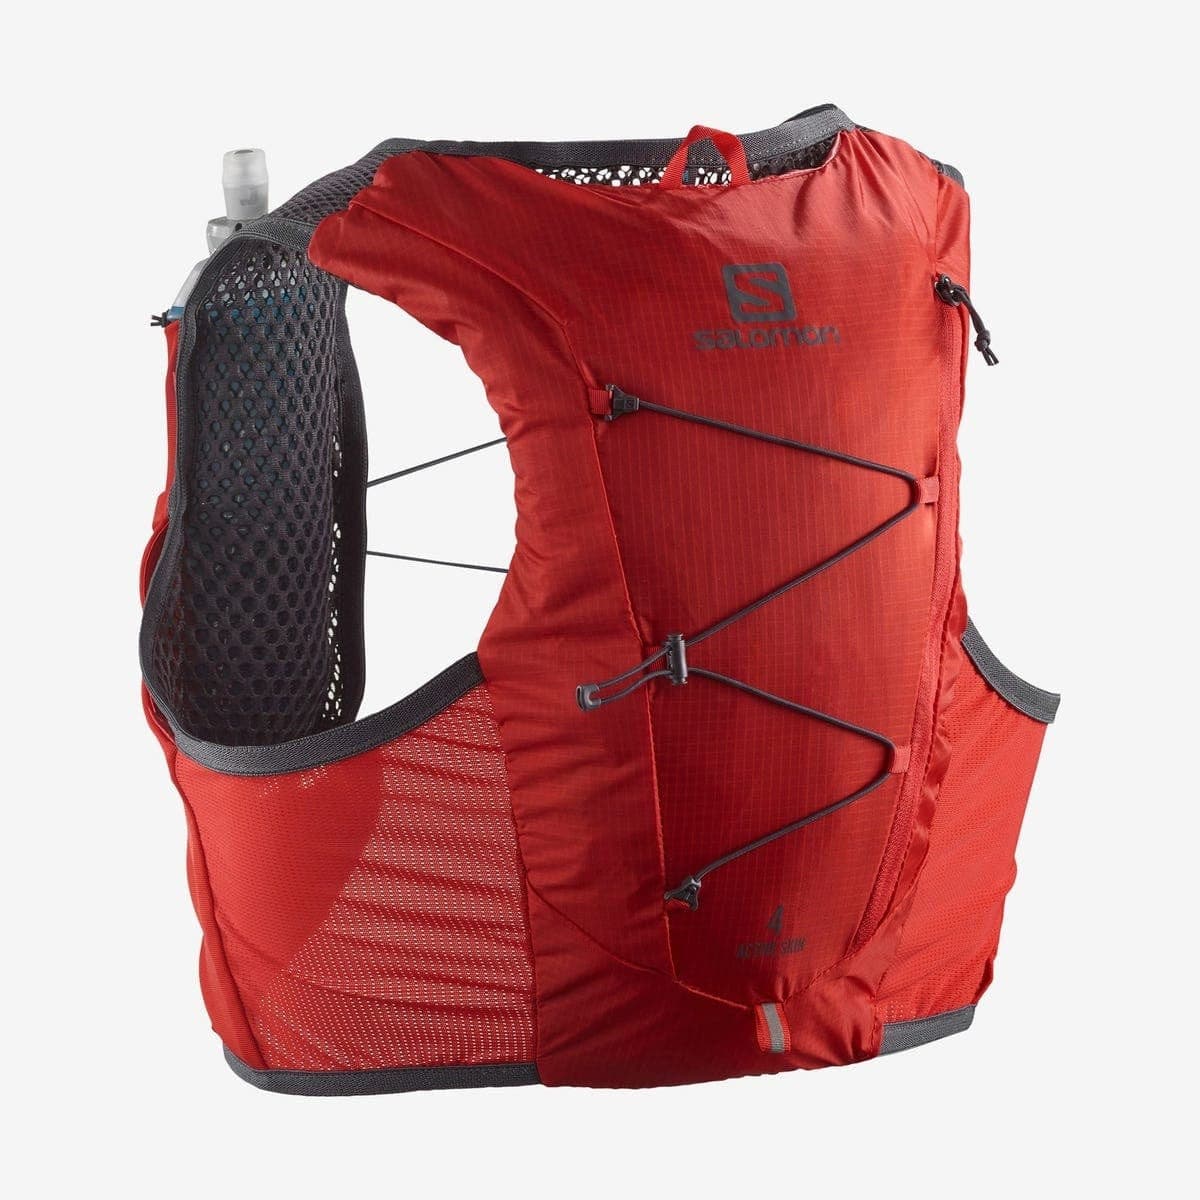 Salomon Active Skin 4 Set with Flasks - Fiery Red